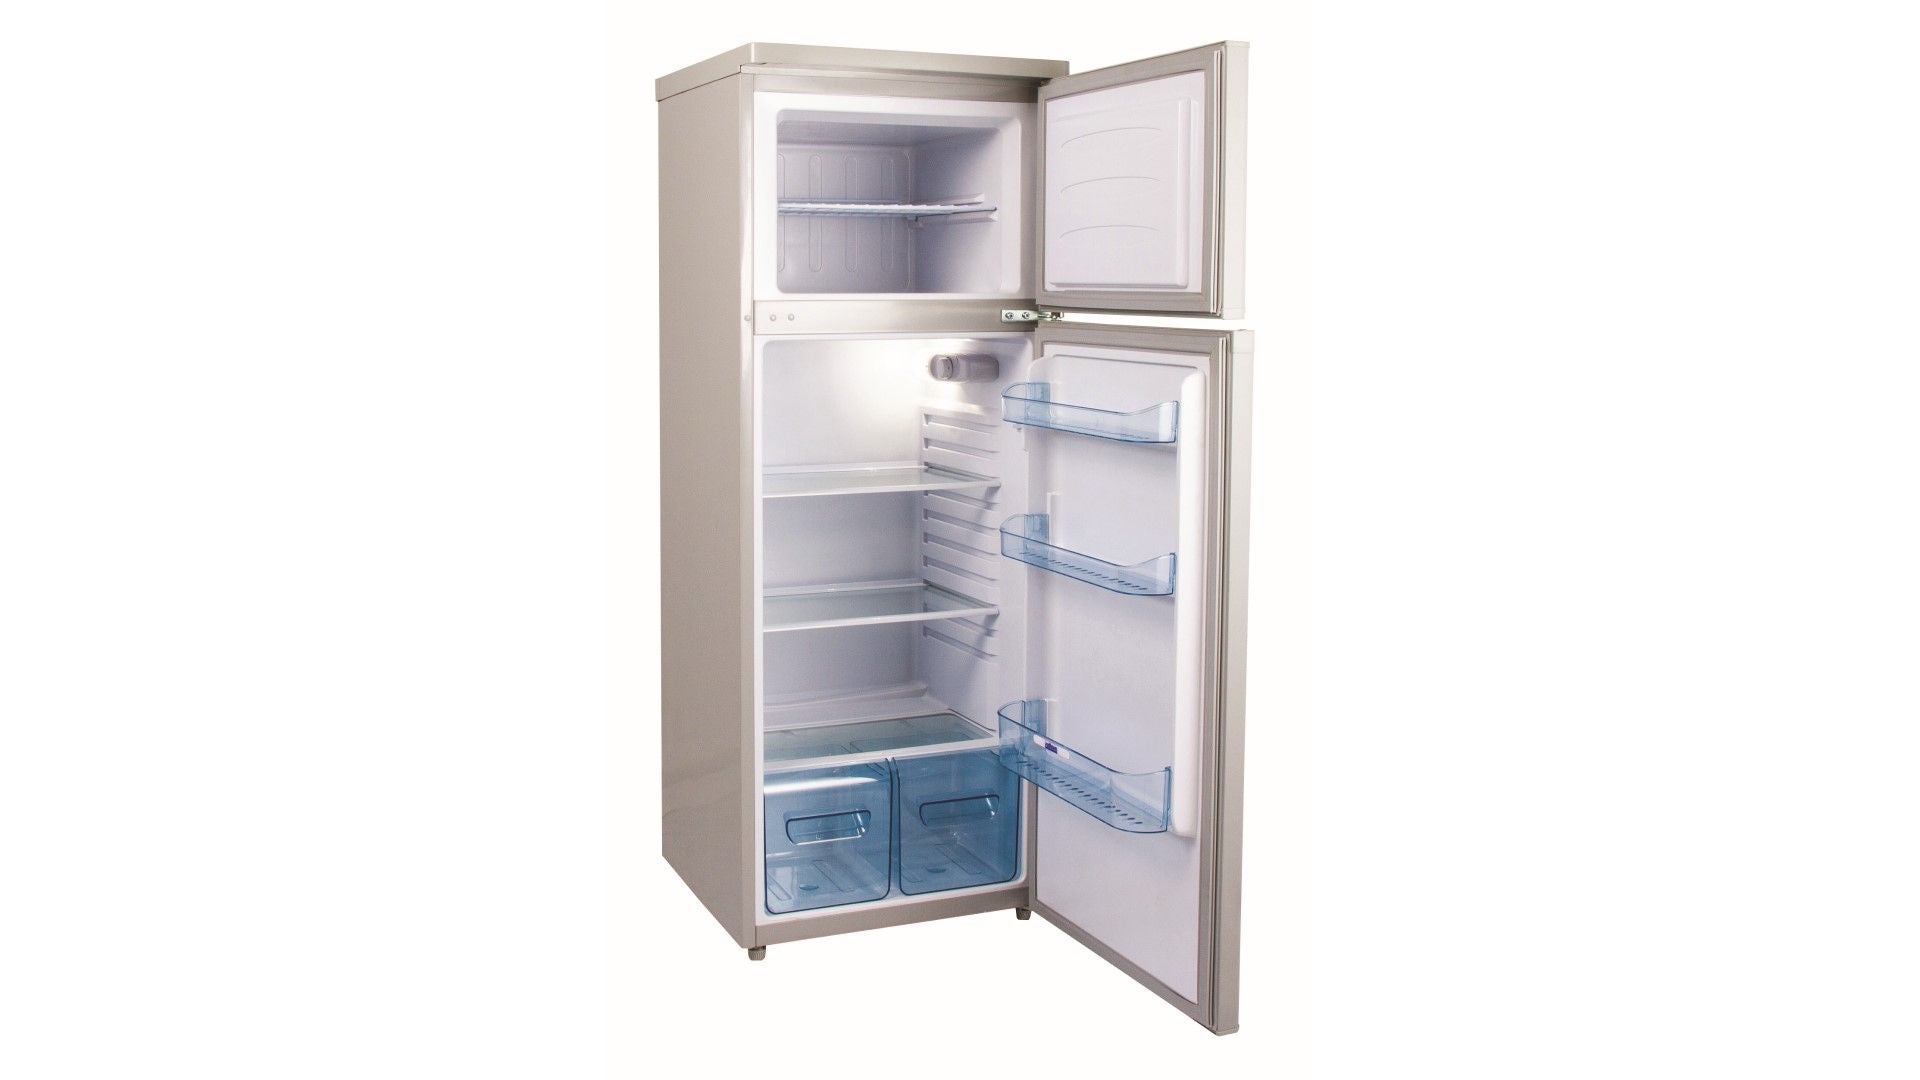 Product picture of Cruise Silver 225 fridge with open door